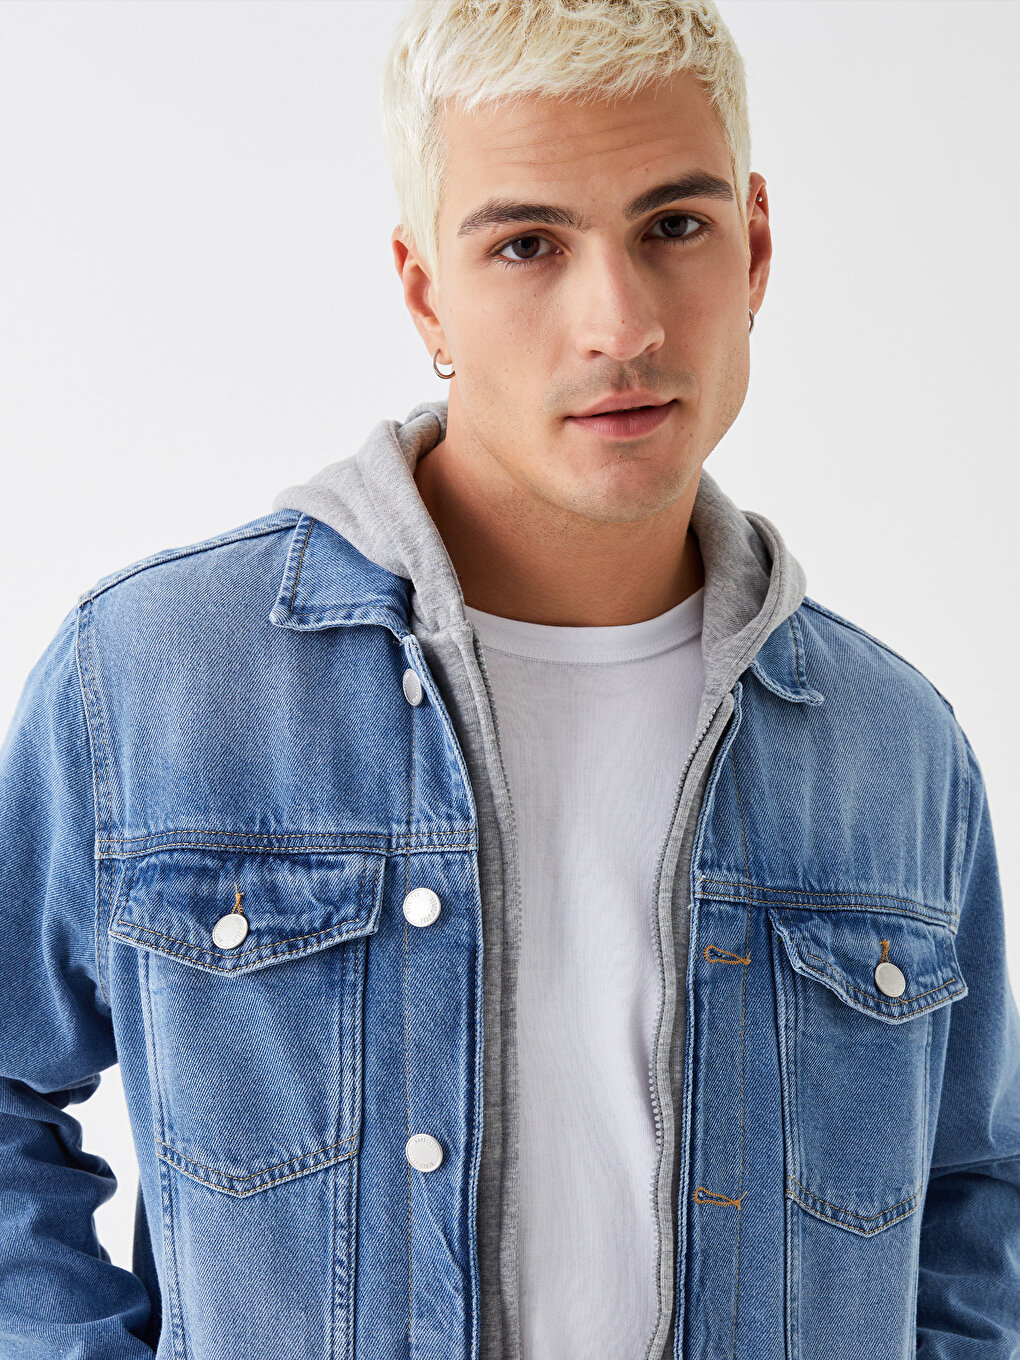 Men's Denim Jacket and Coats - More Styles | GUESS